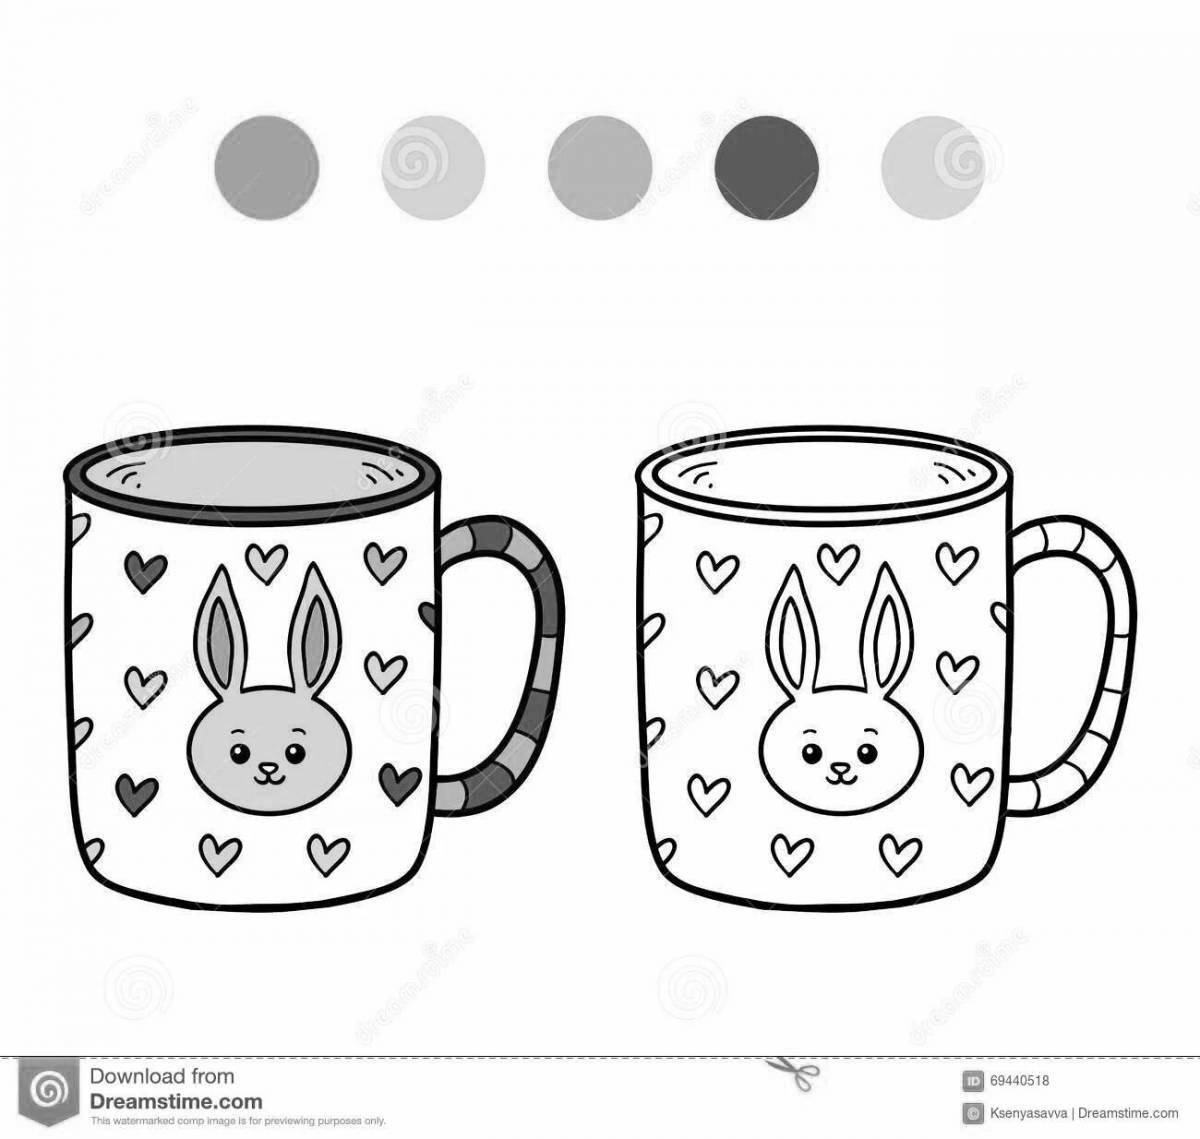 Fun coloring mug for 3-4 year olds